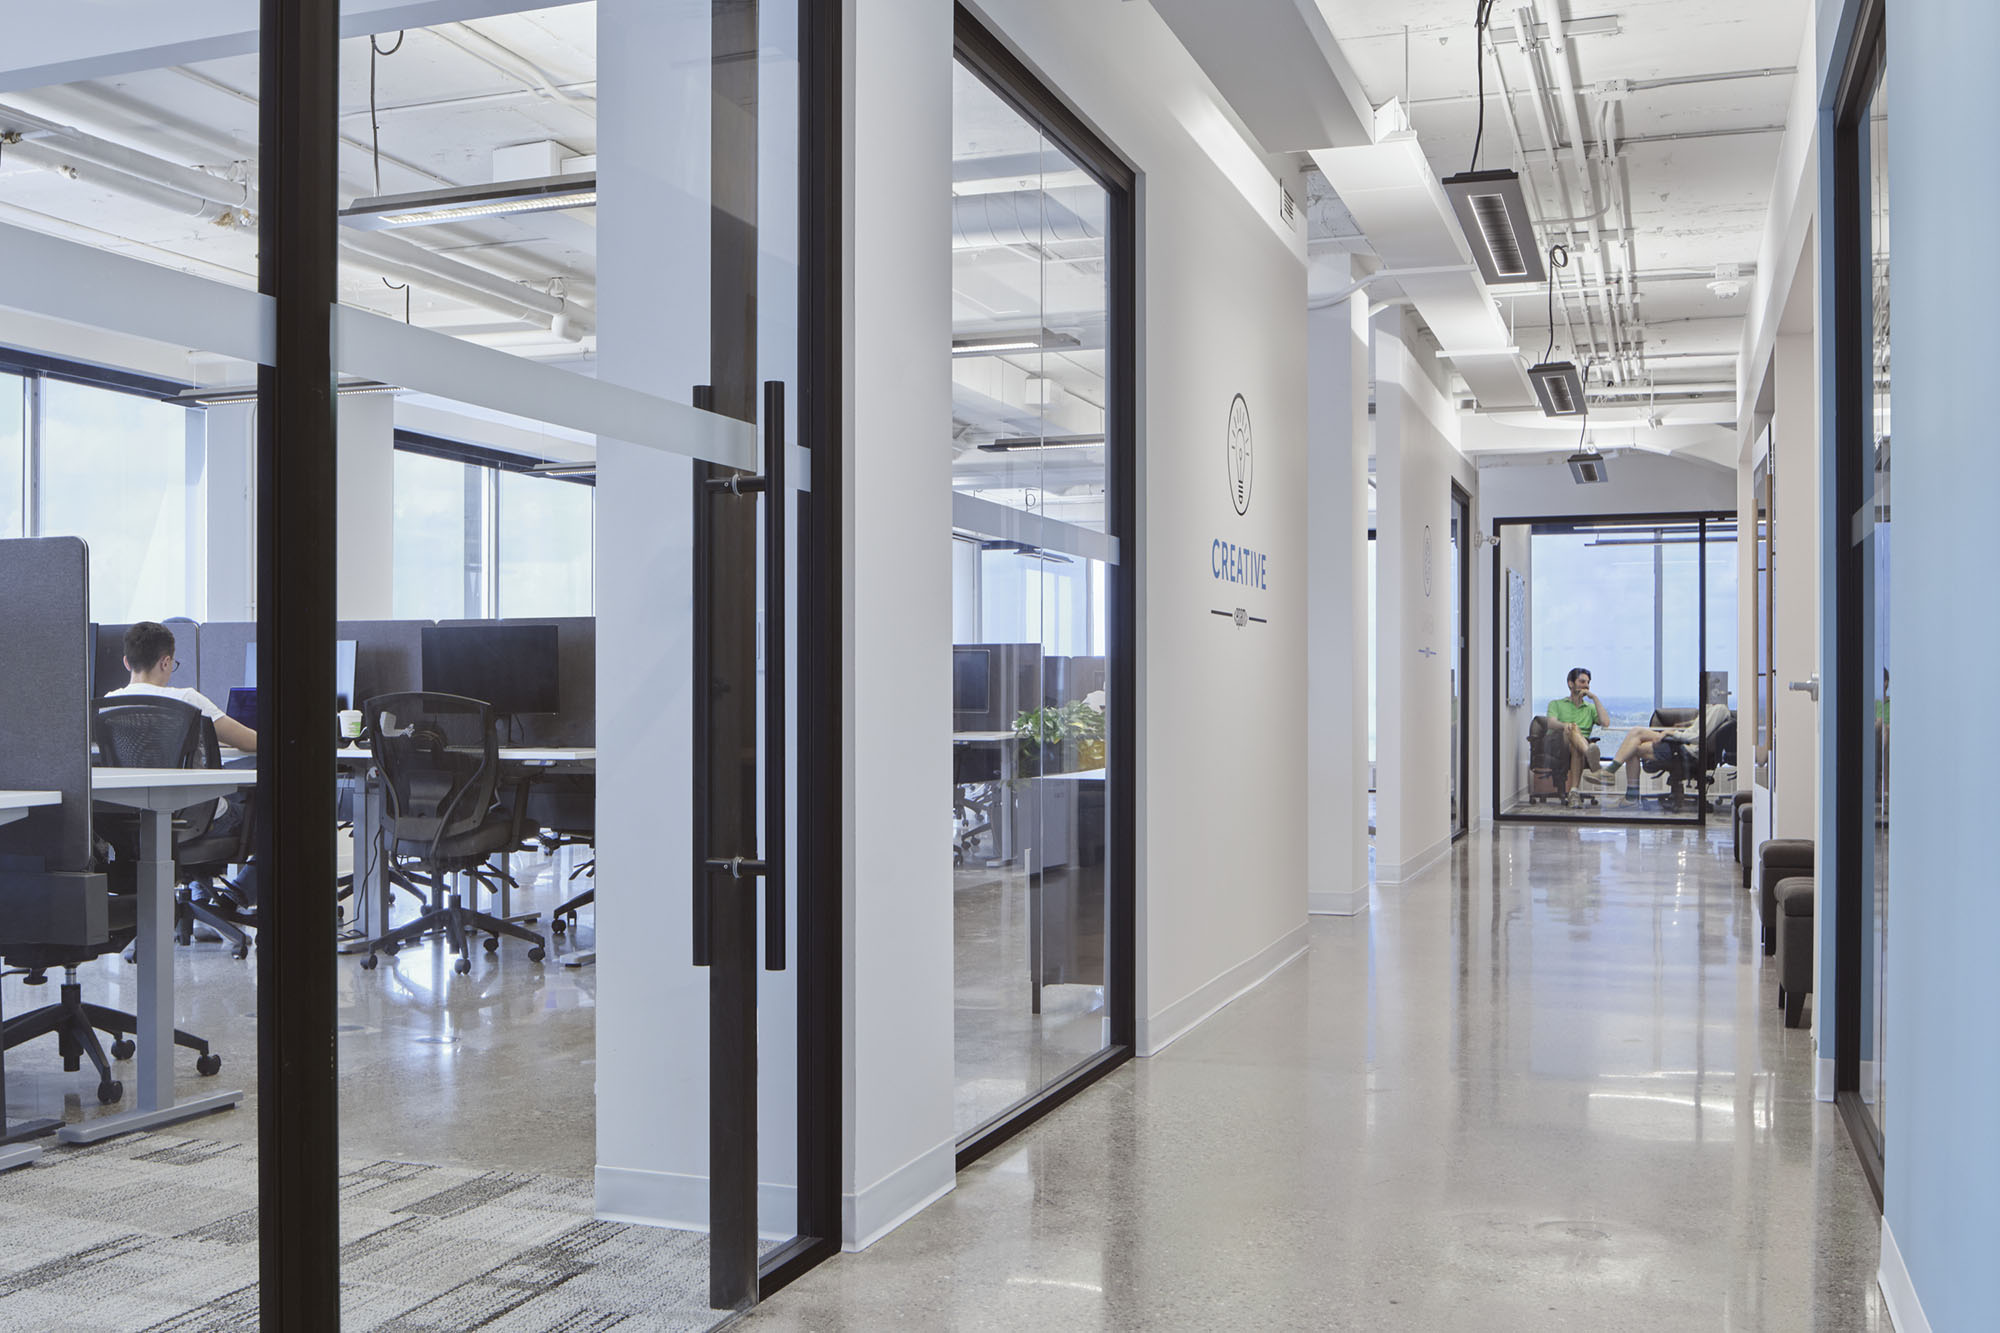 hallway of office with people working at desks and meetings